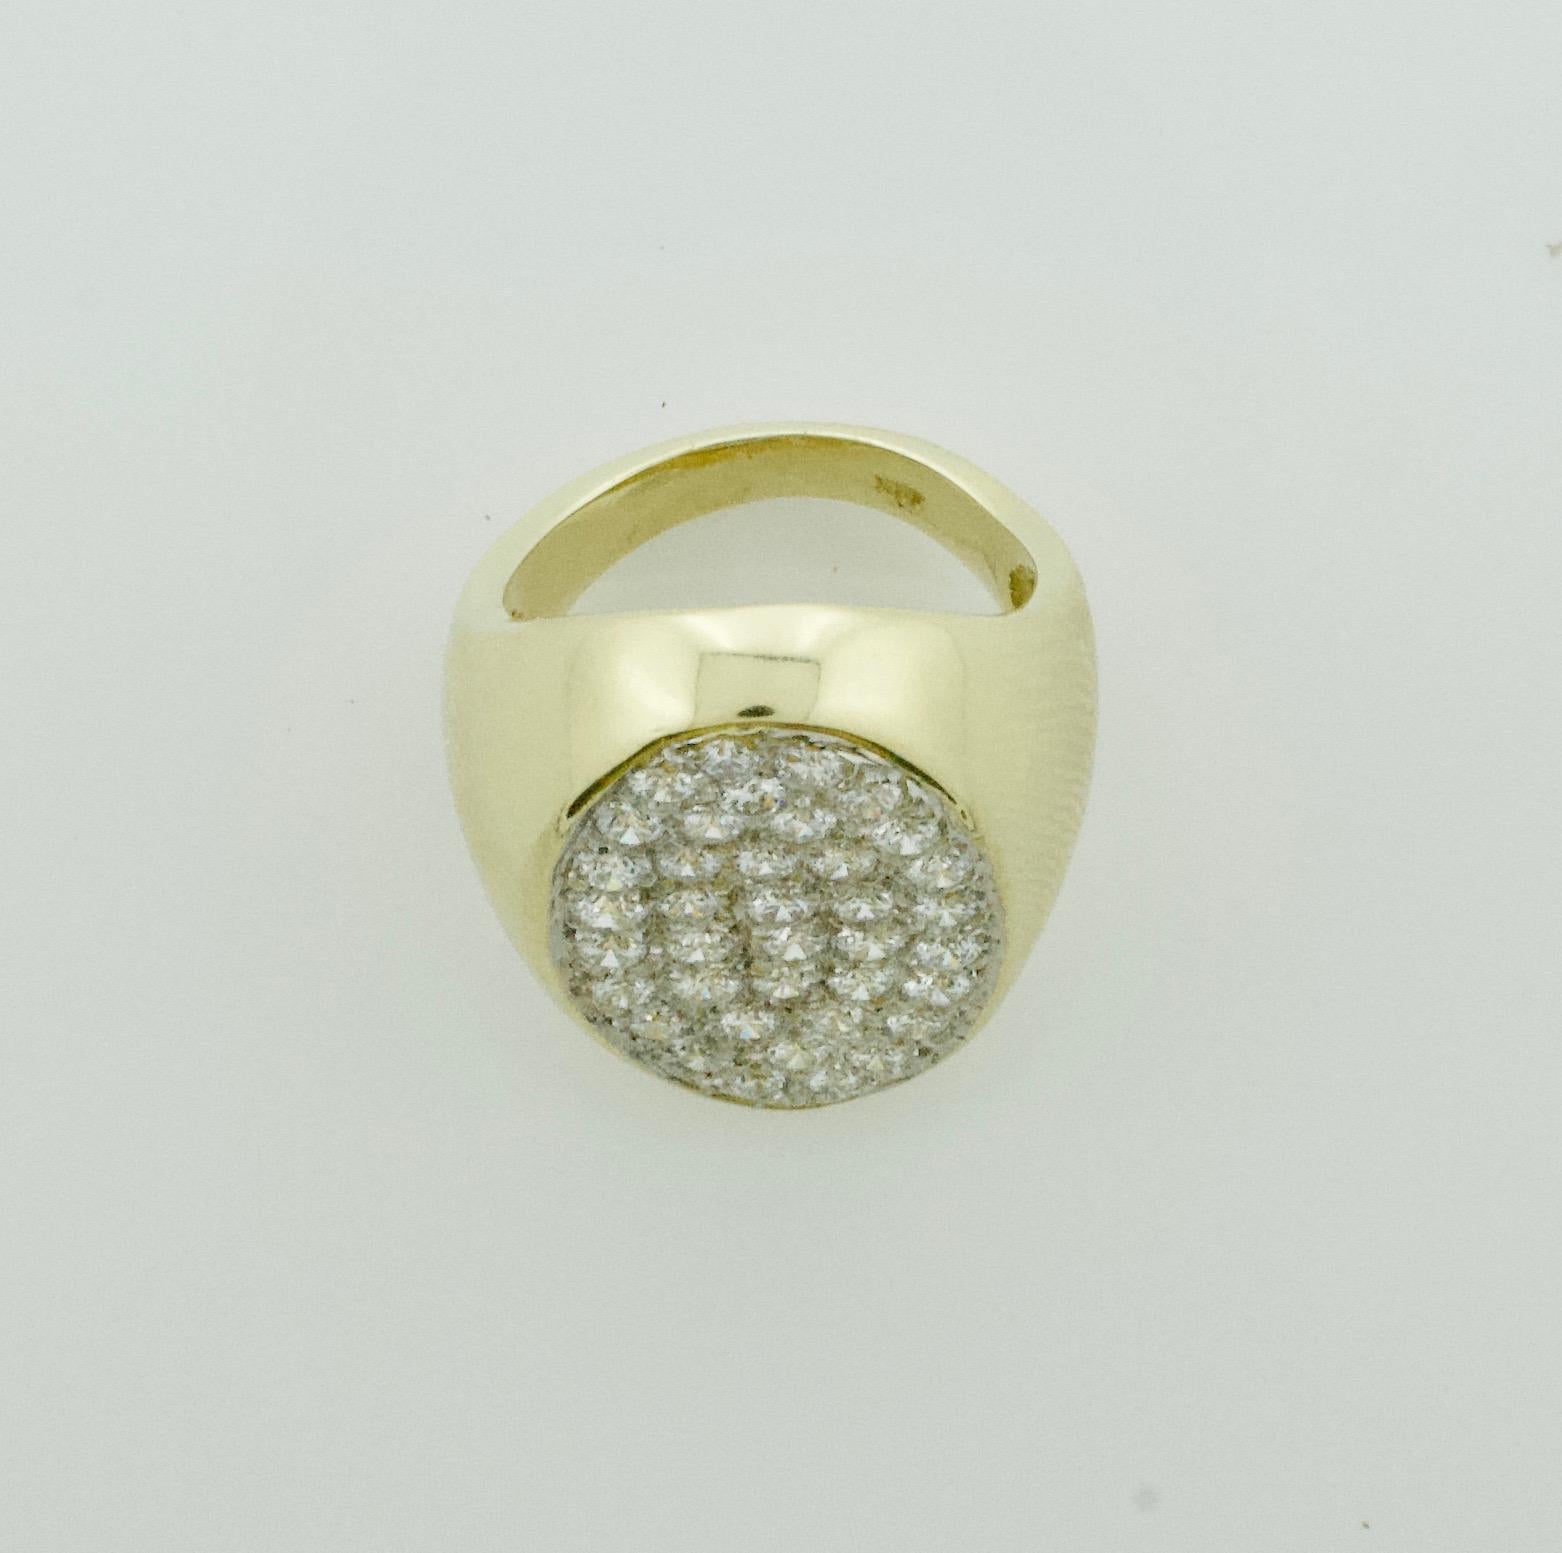 Pave Diamond Ring in 18 Karat 2.00 carats in 18k
Thirty Eight Round Brilliant Cut Diamonds weighing 2.00 carats approximately [GH-VVS-VS1]  Very Fine Diamonds
Currently Size 4.75 (The Petite Celebrity's Size) Can Be Sized By Us Or Your Qualified